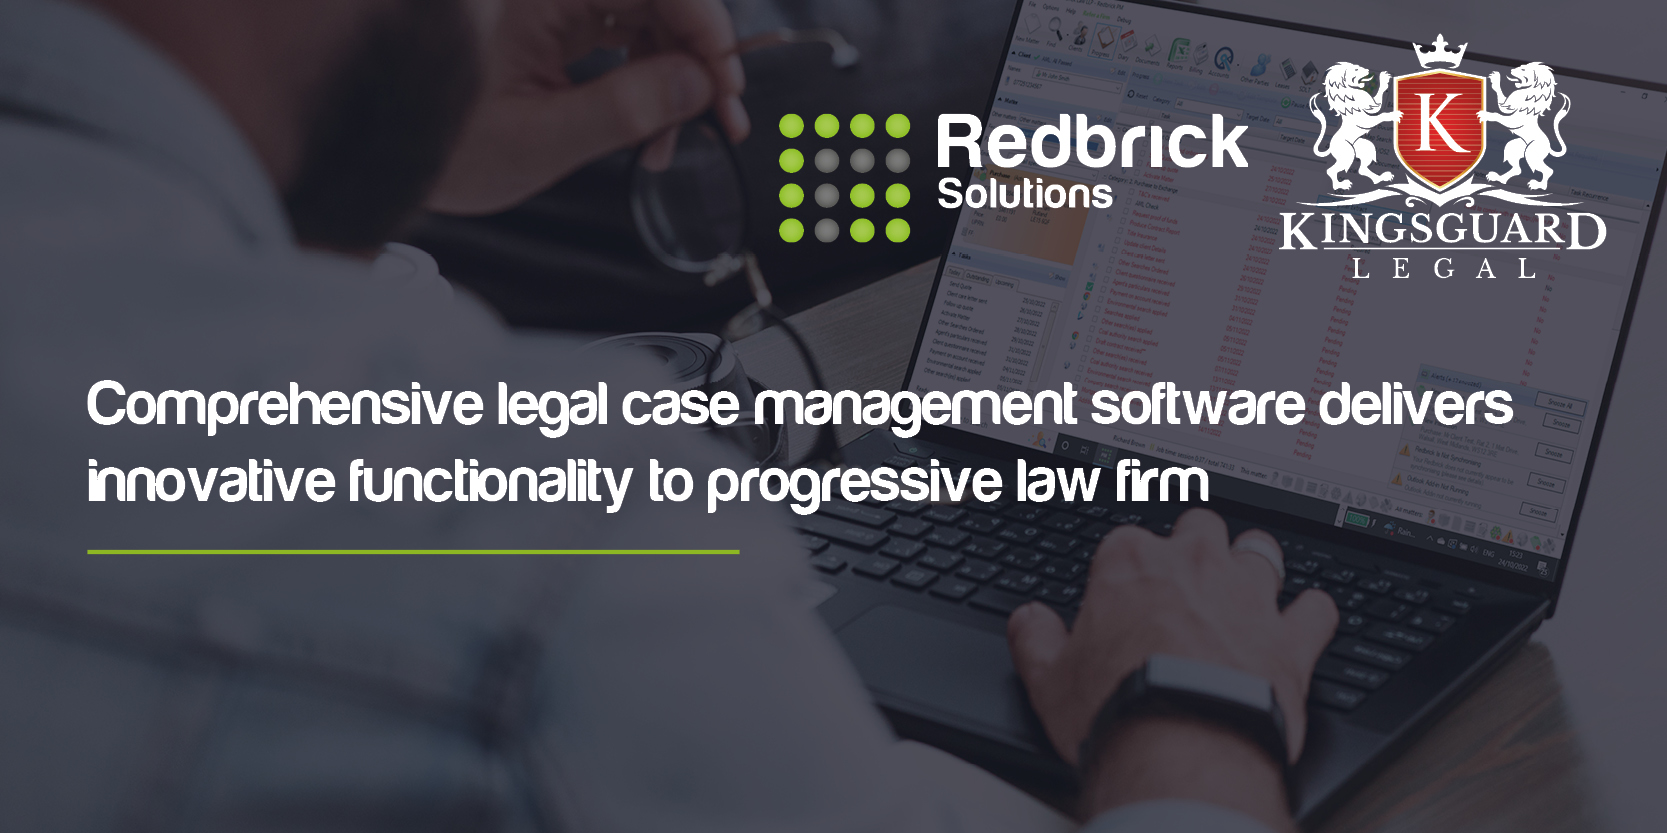 Comprehensive legal case management software delivers innovative functionality to progressive law firm